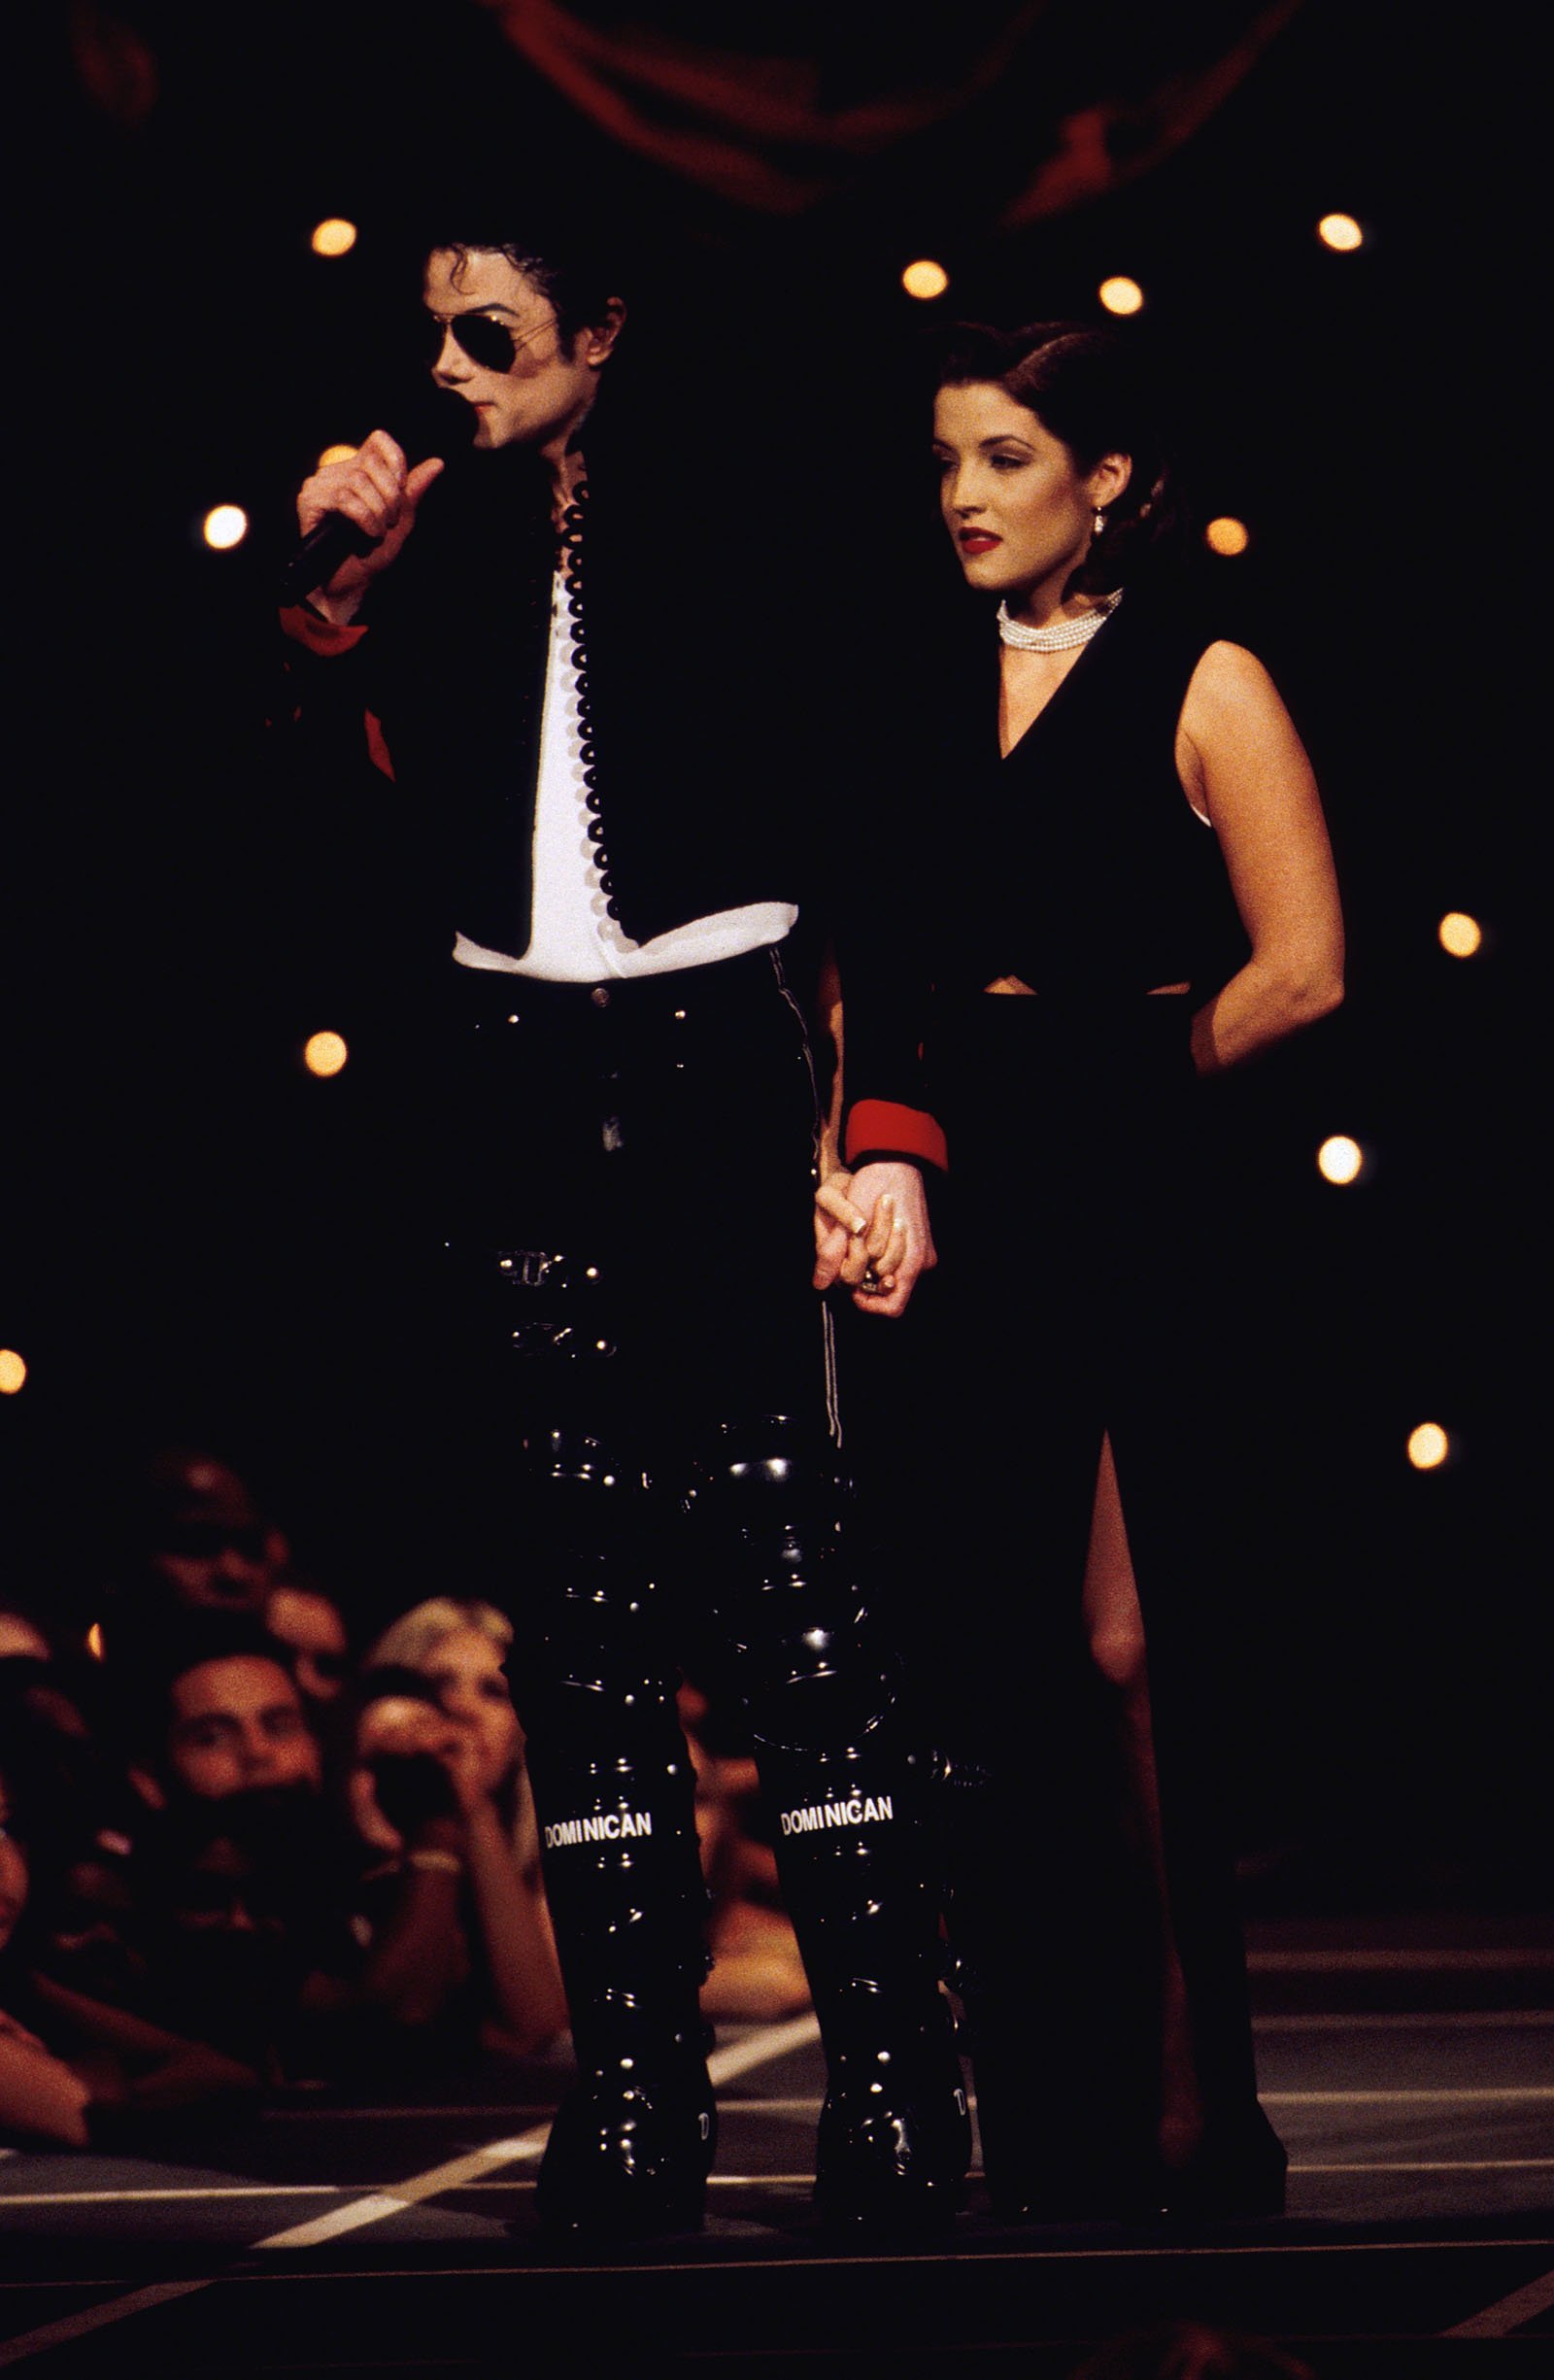 Michael Jackson and Lisa Marie Presley at the 1994 MTV Video Music Awards | Photo: Getty Images